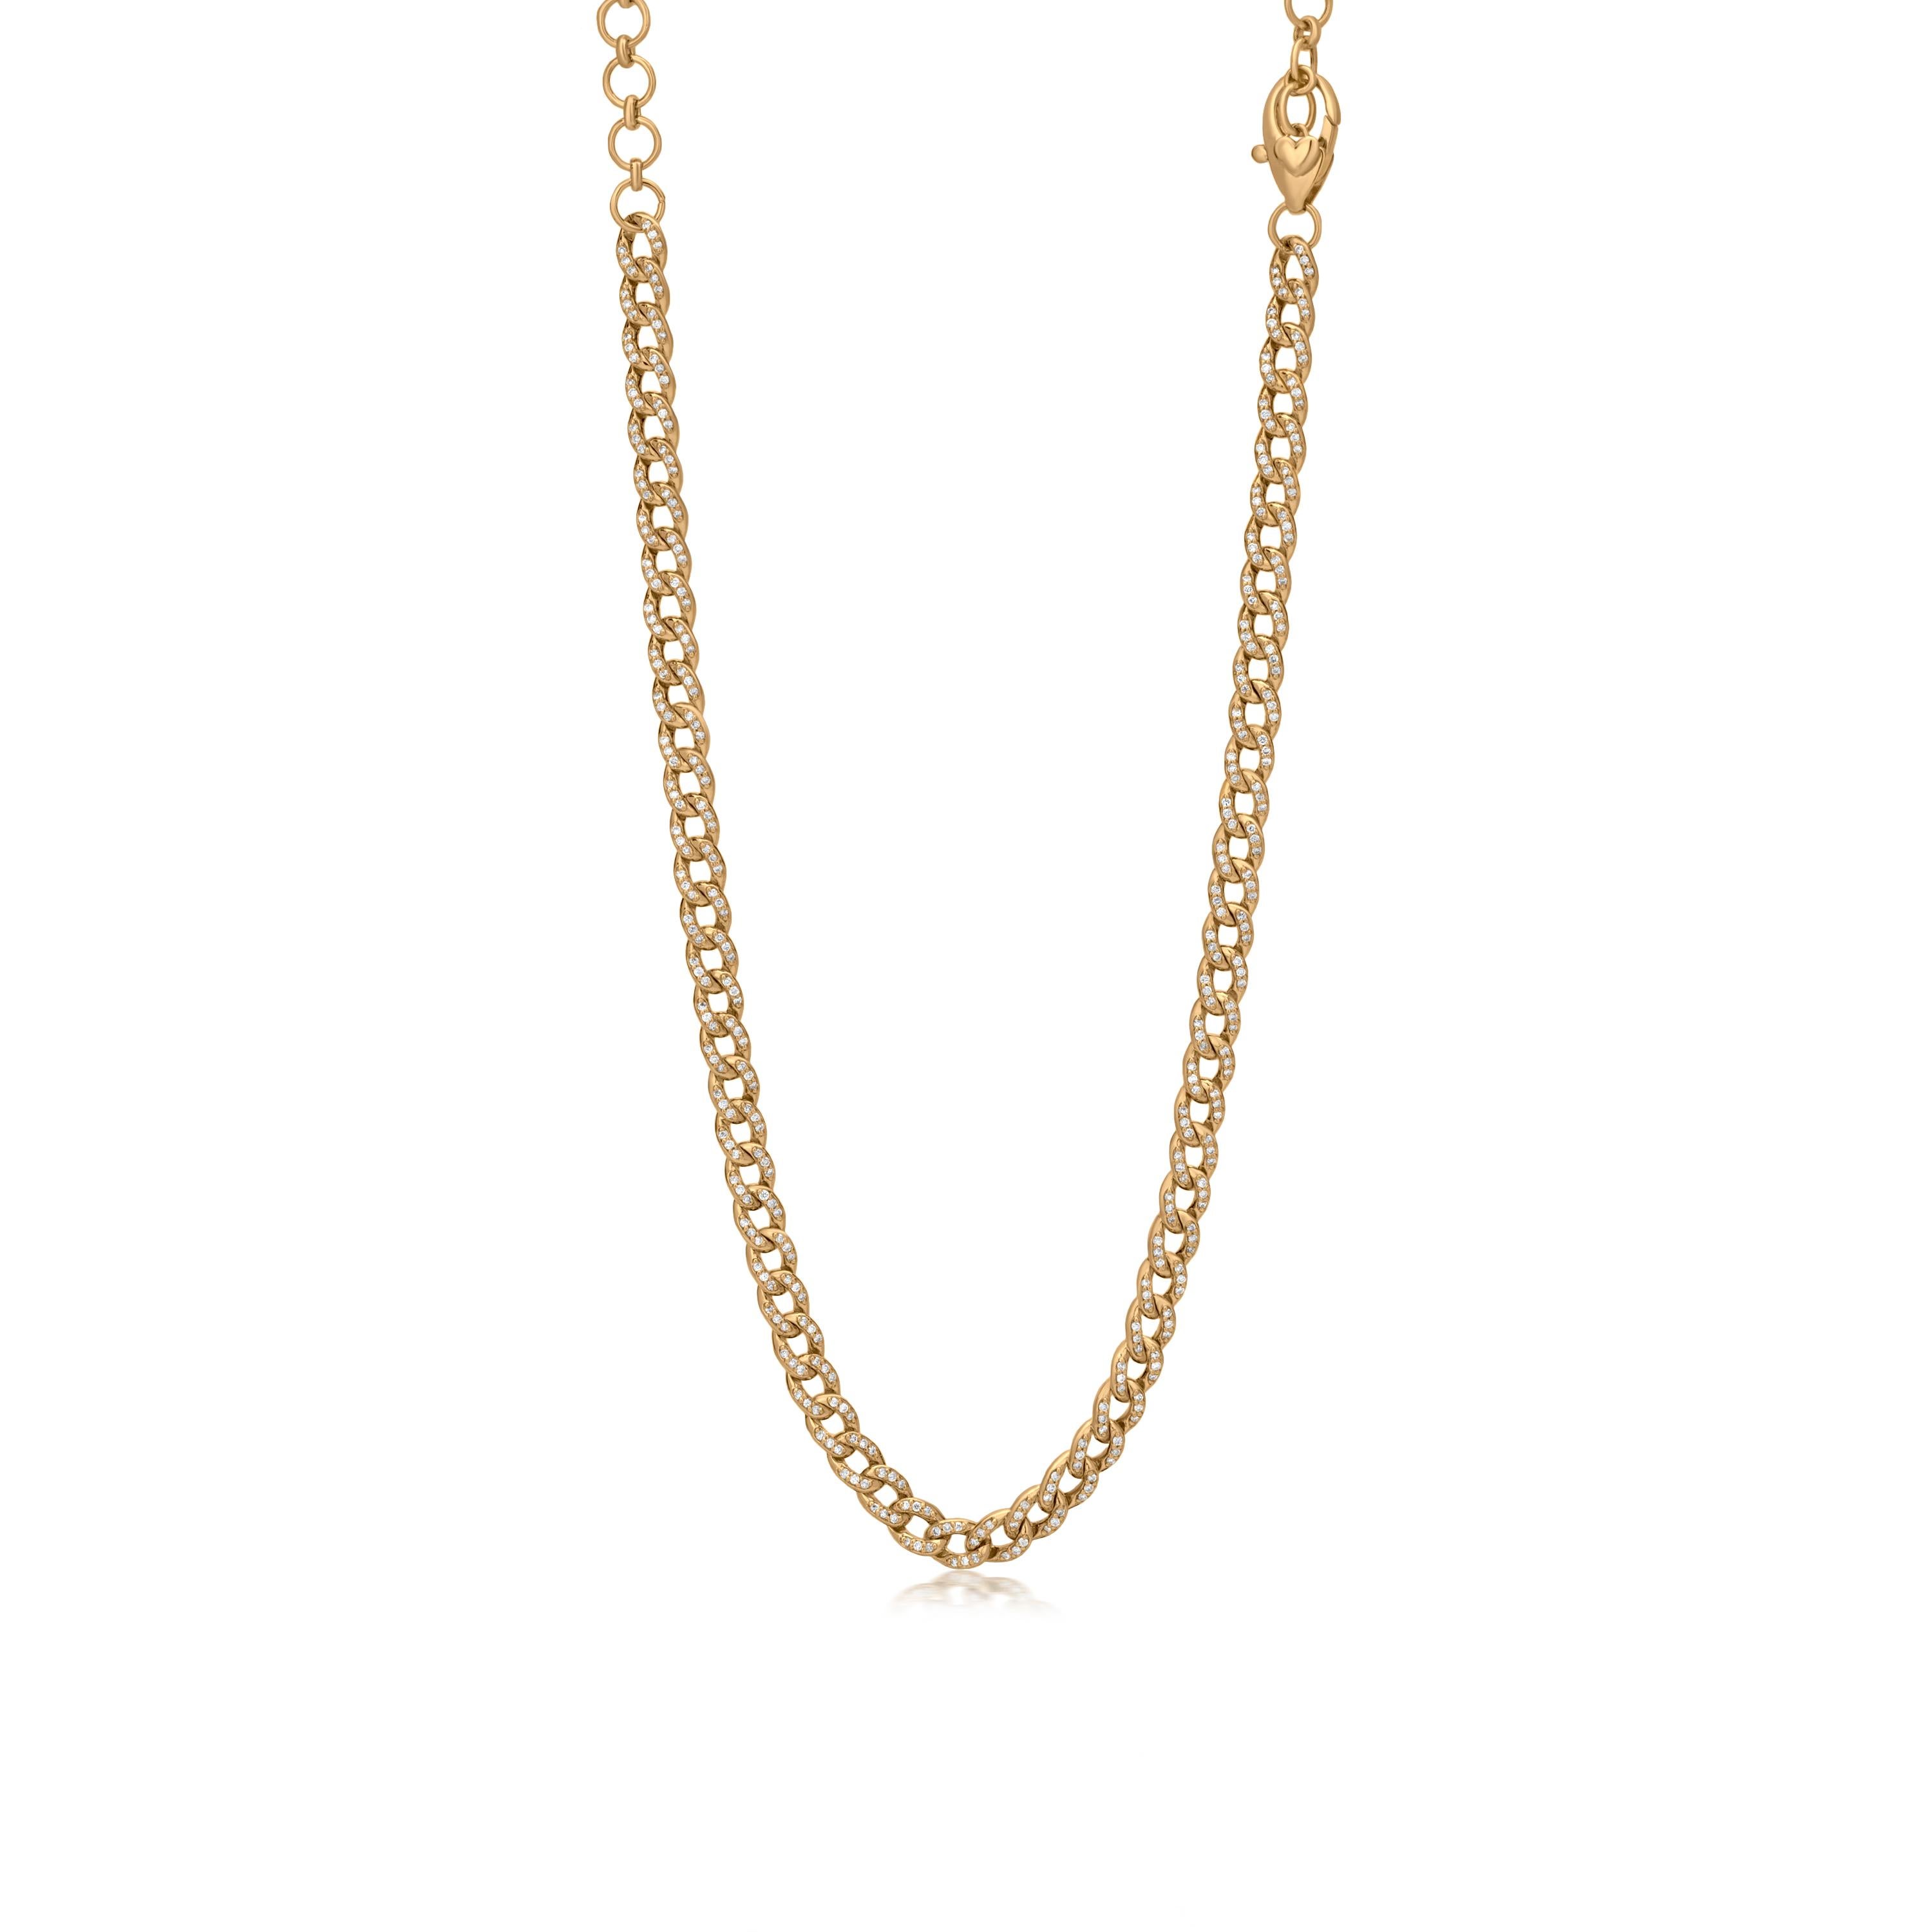 This Nigaam necklace features 18k yellow gold curb link chain. The yellow gold chain necklace is accentuated by prong set 1.45 Ct. T.W. round brilliant diamonds over it and enclosed by a lobster clasp with a signature design. The diamonds are I1 in